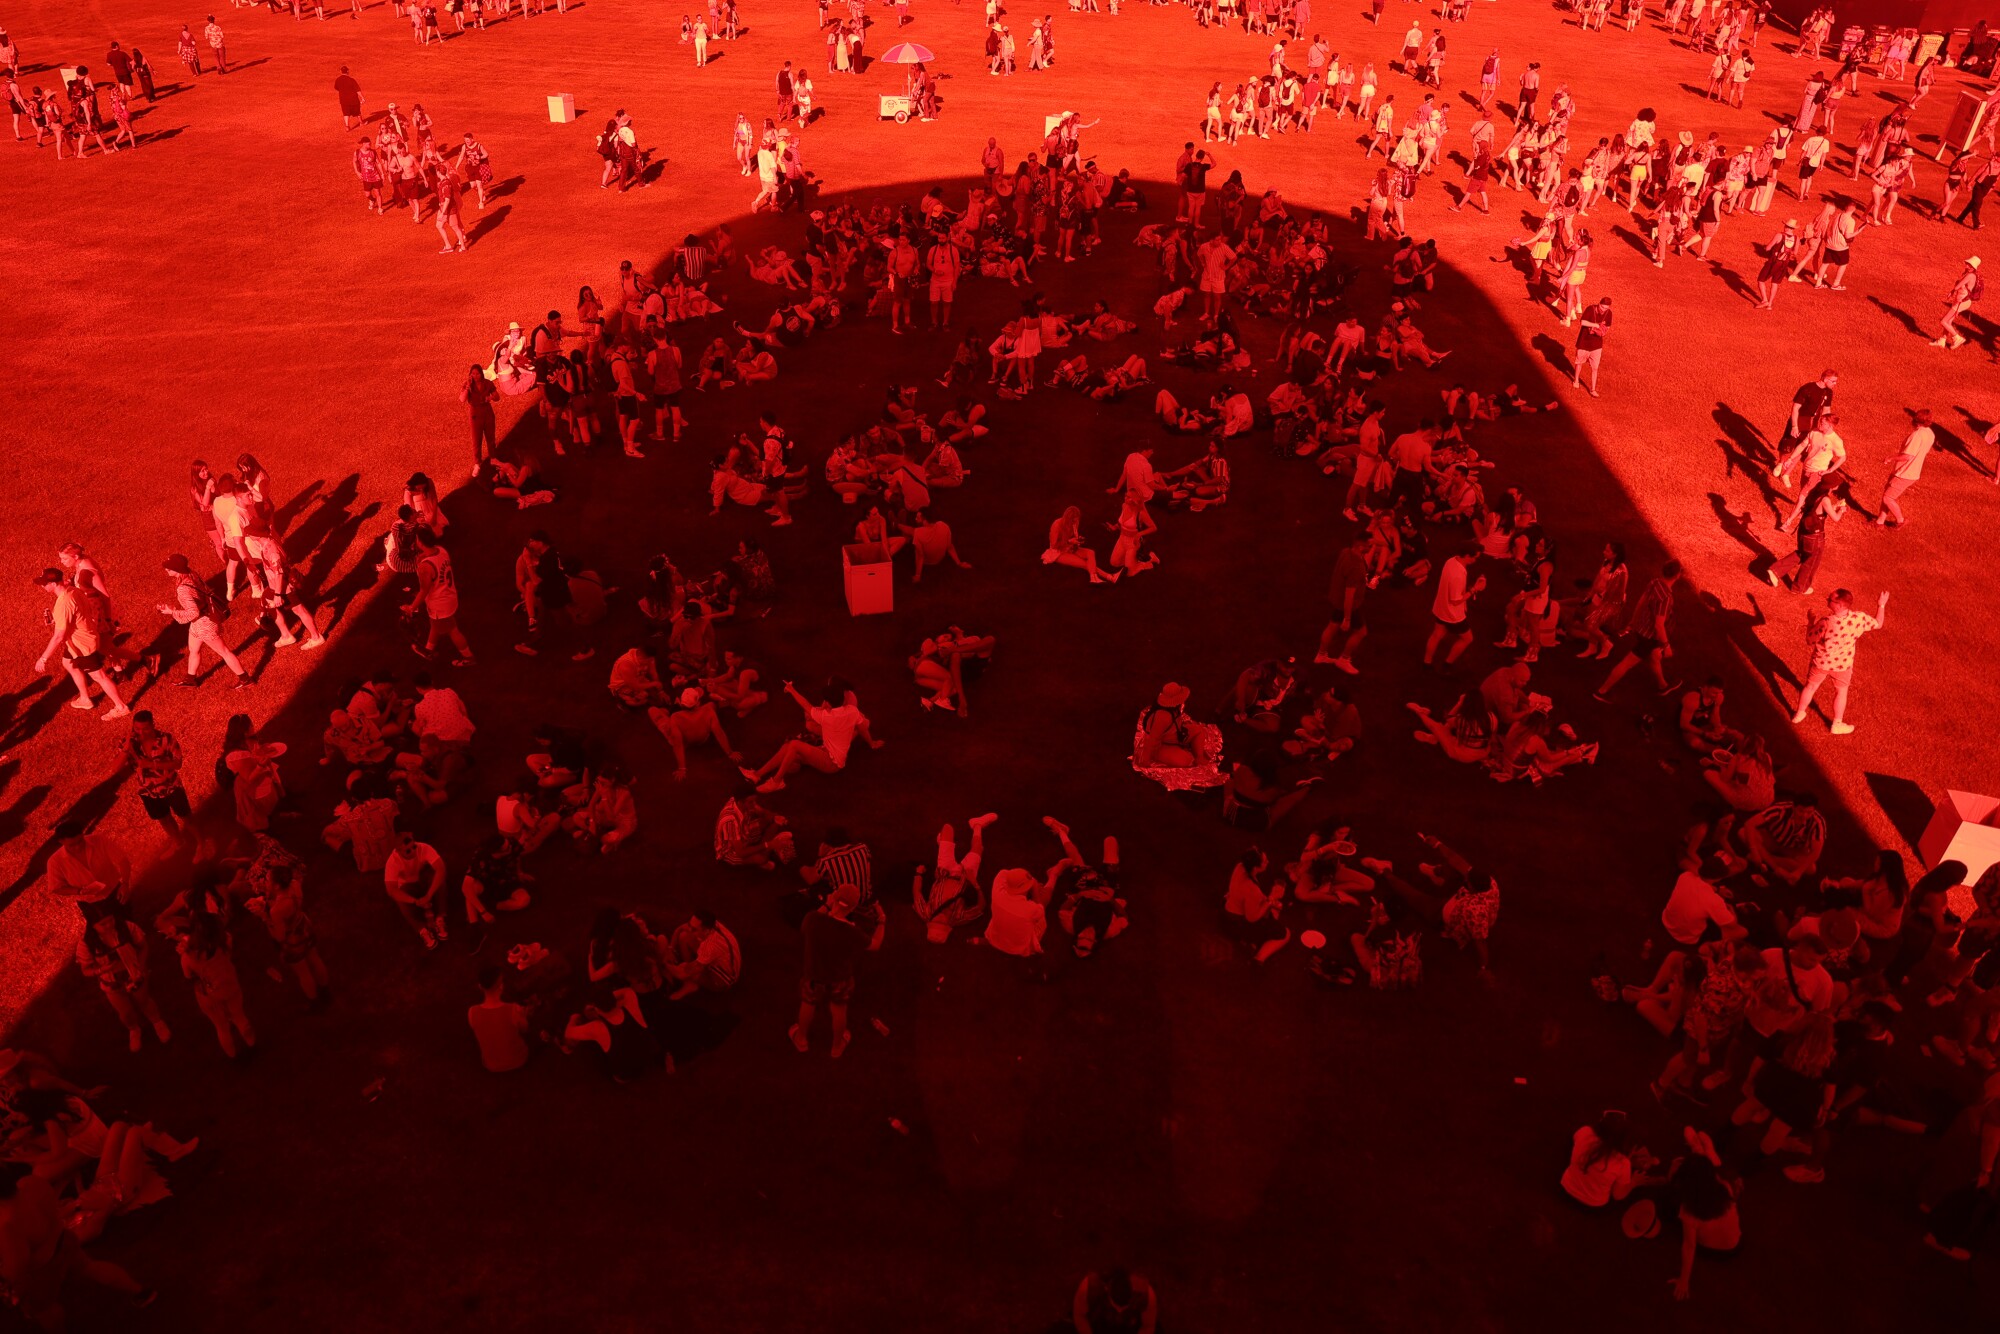 People seek some shade outdoors as others walk by in the sun in a red-tinted photo.